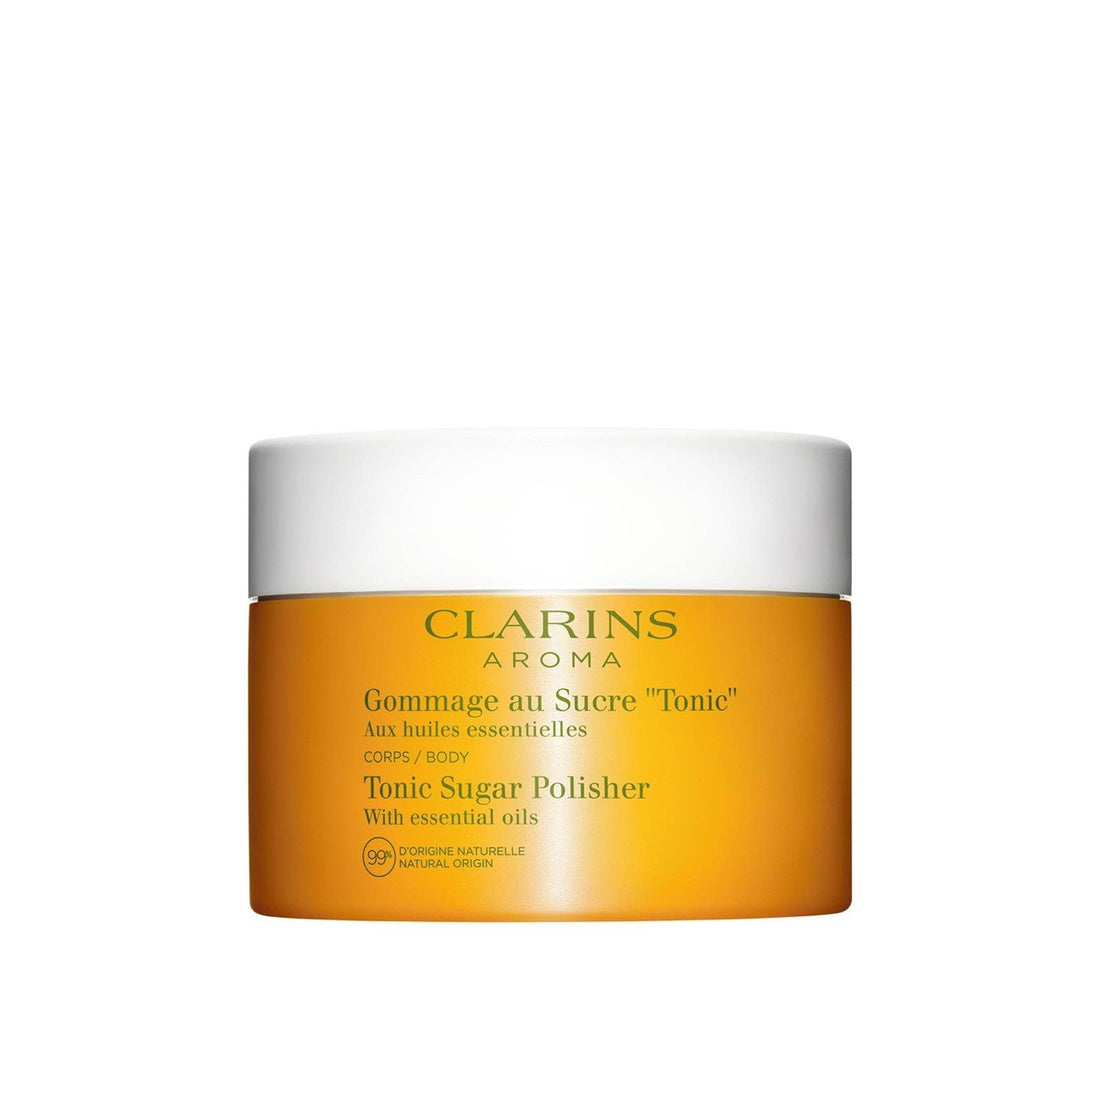 Clarins Aroma Tonic Sucre Polisseur 250 g